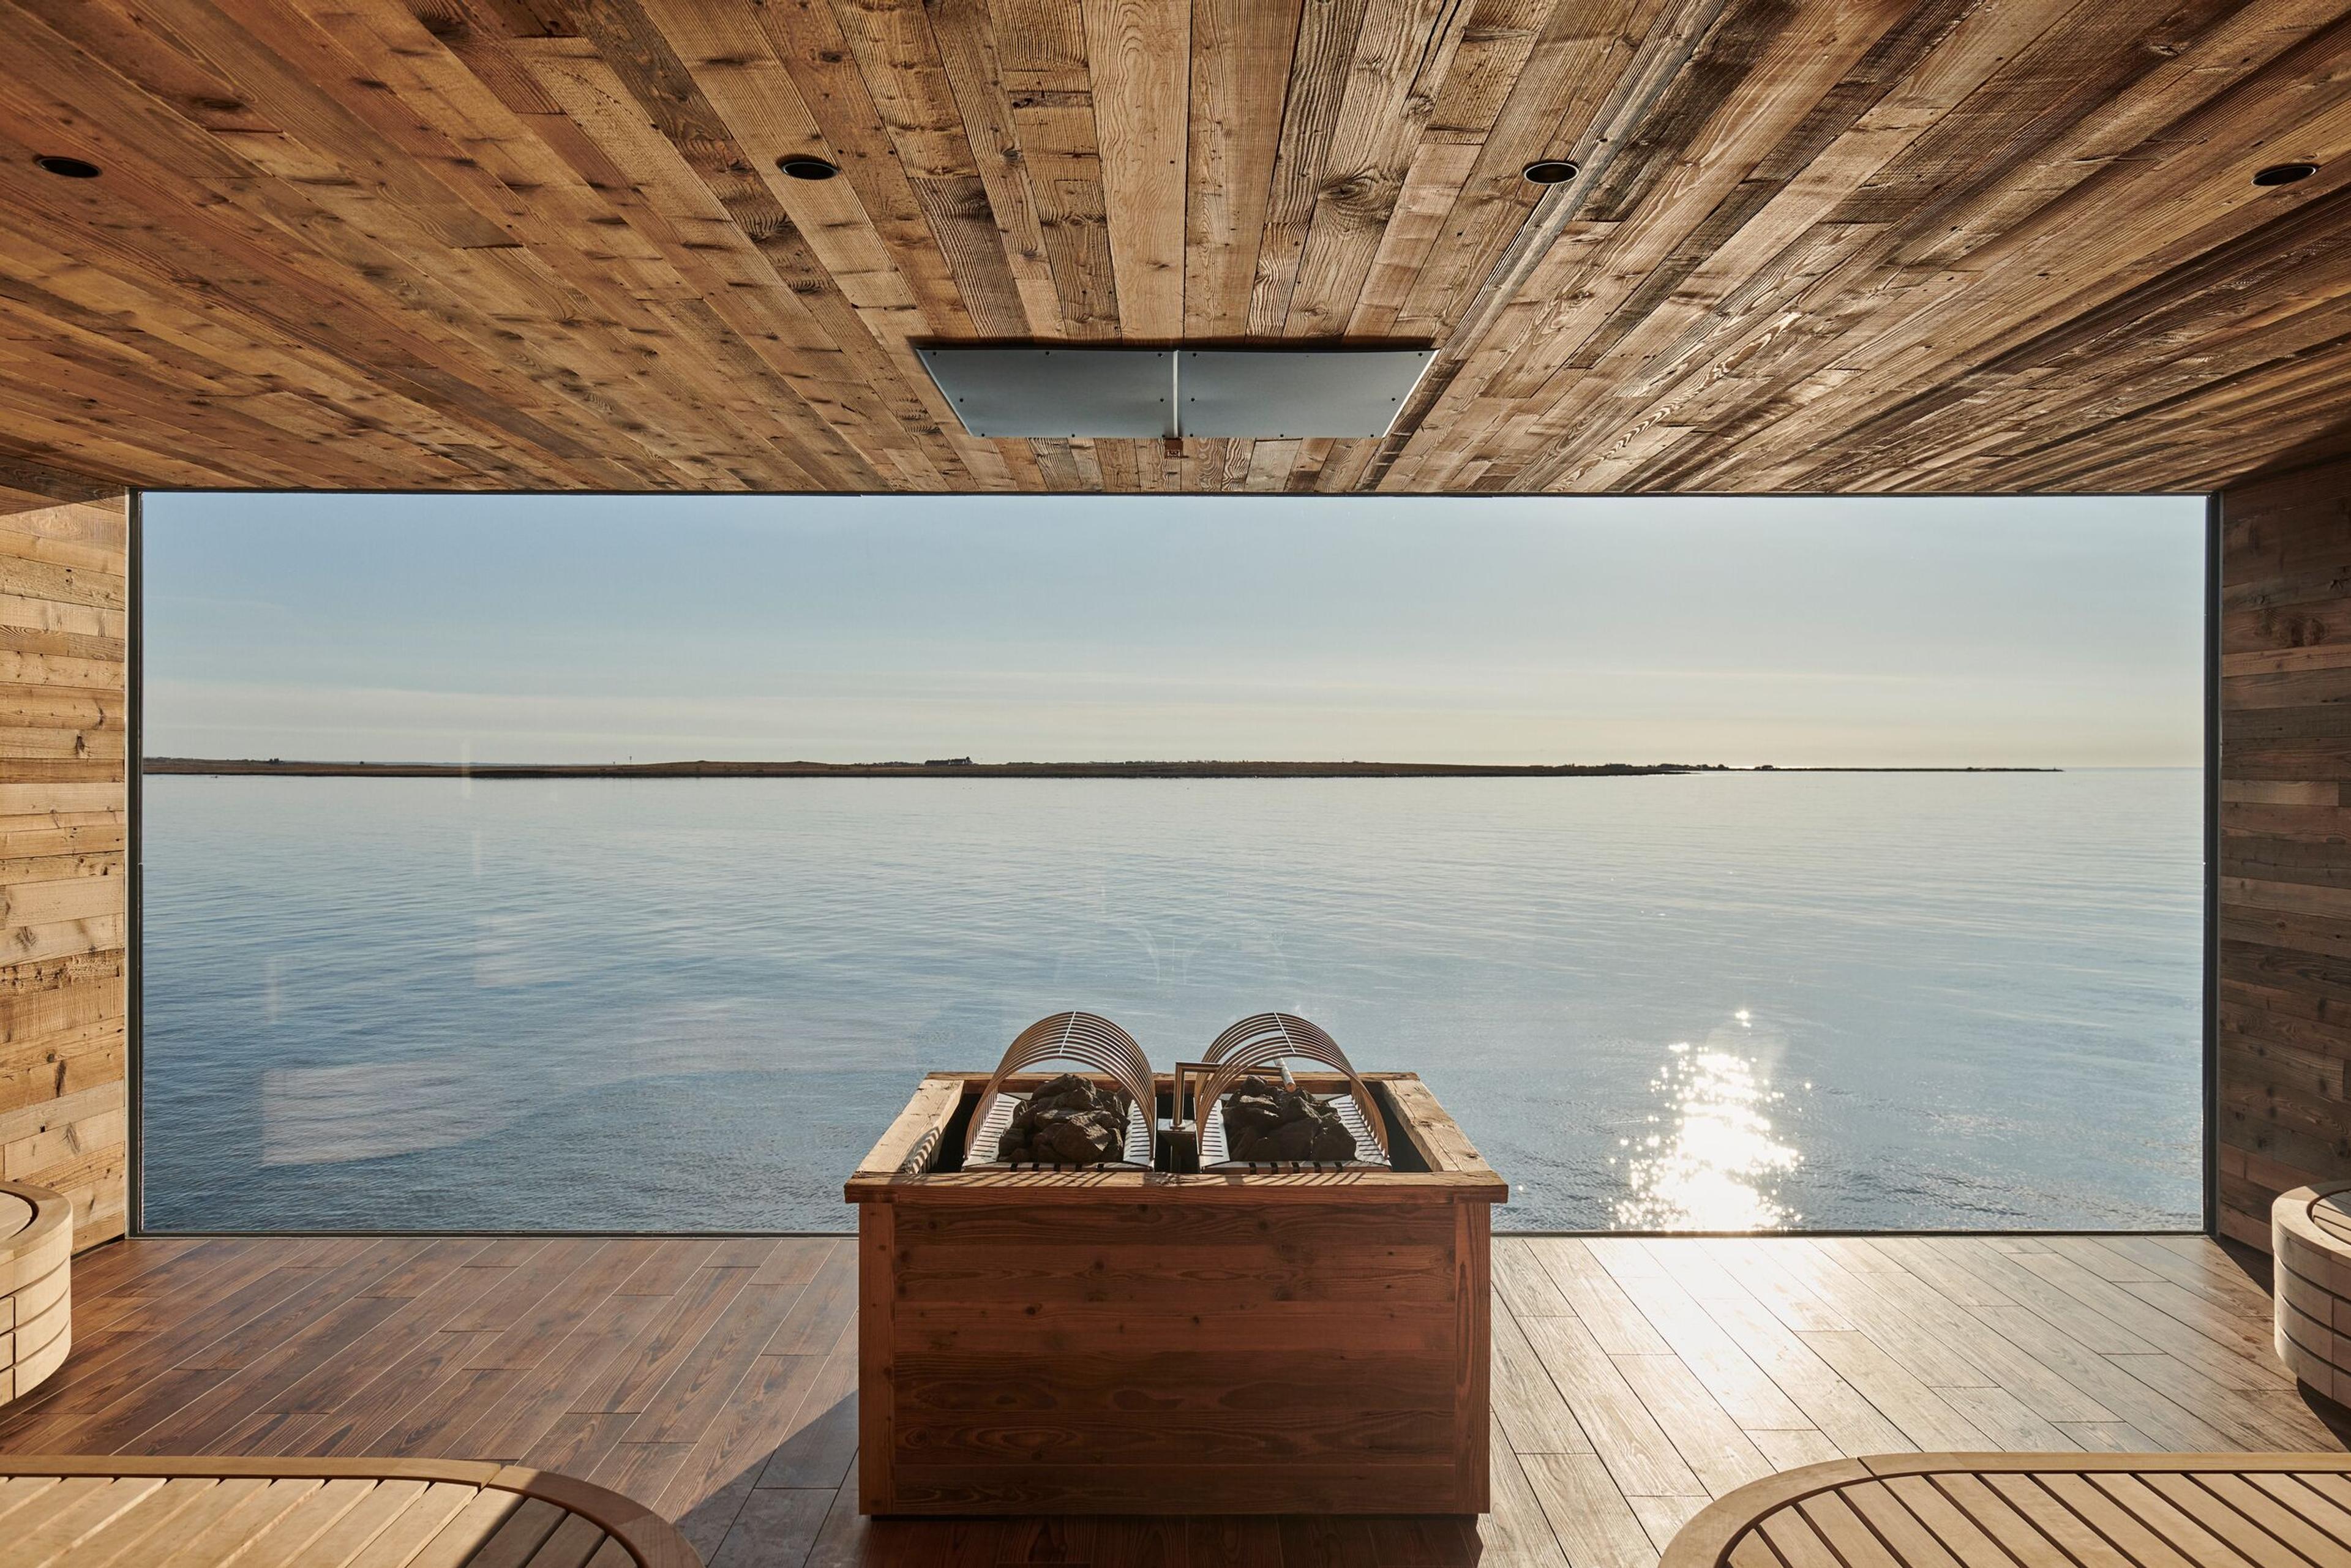 The interior of a sauna at Sky Lagoon with rustic wooden walls and ceiling, featuring a large window that offers a panoramic view of the calm sea and horizon, illuminated by the sun’s reflection on the water.